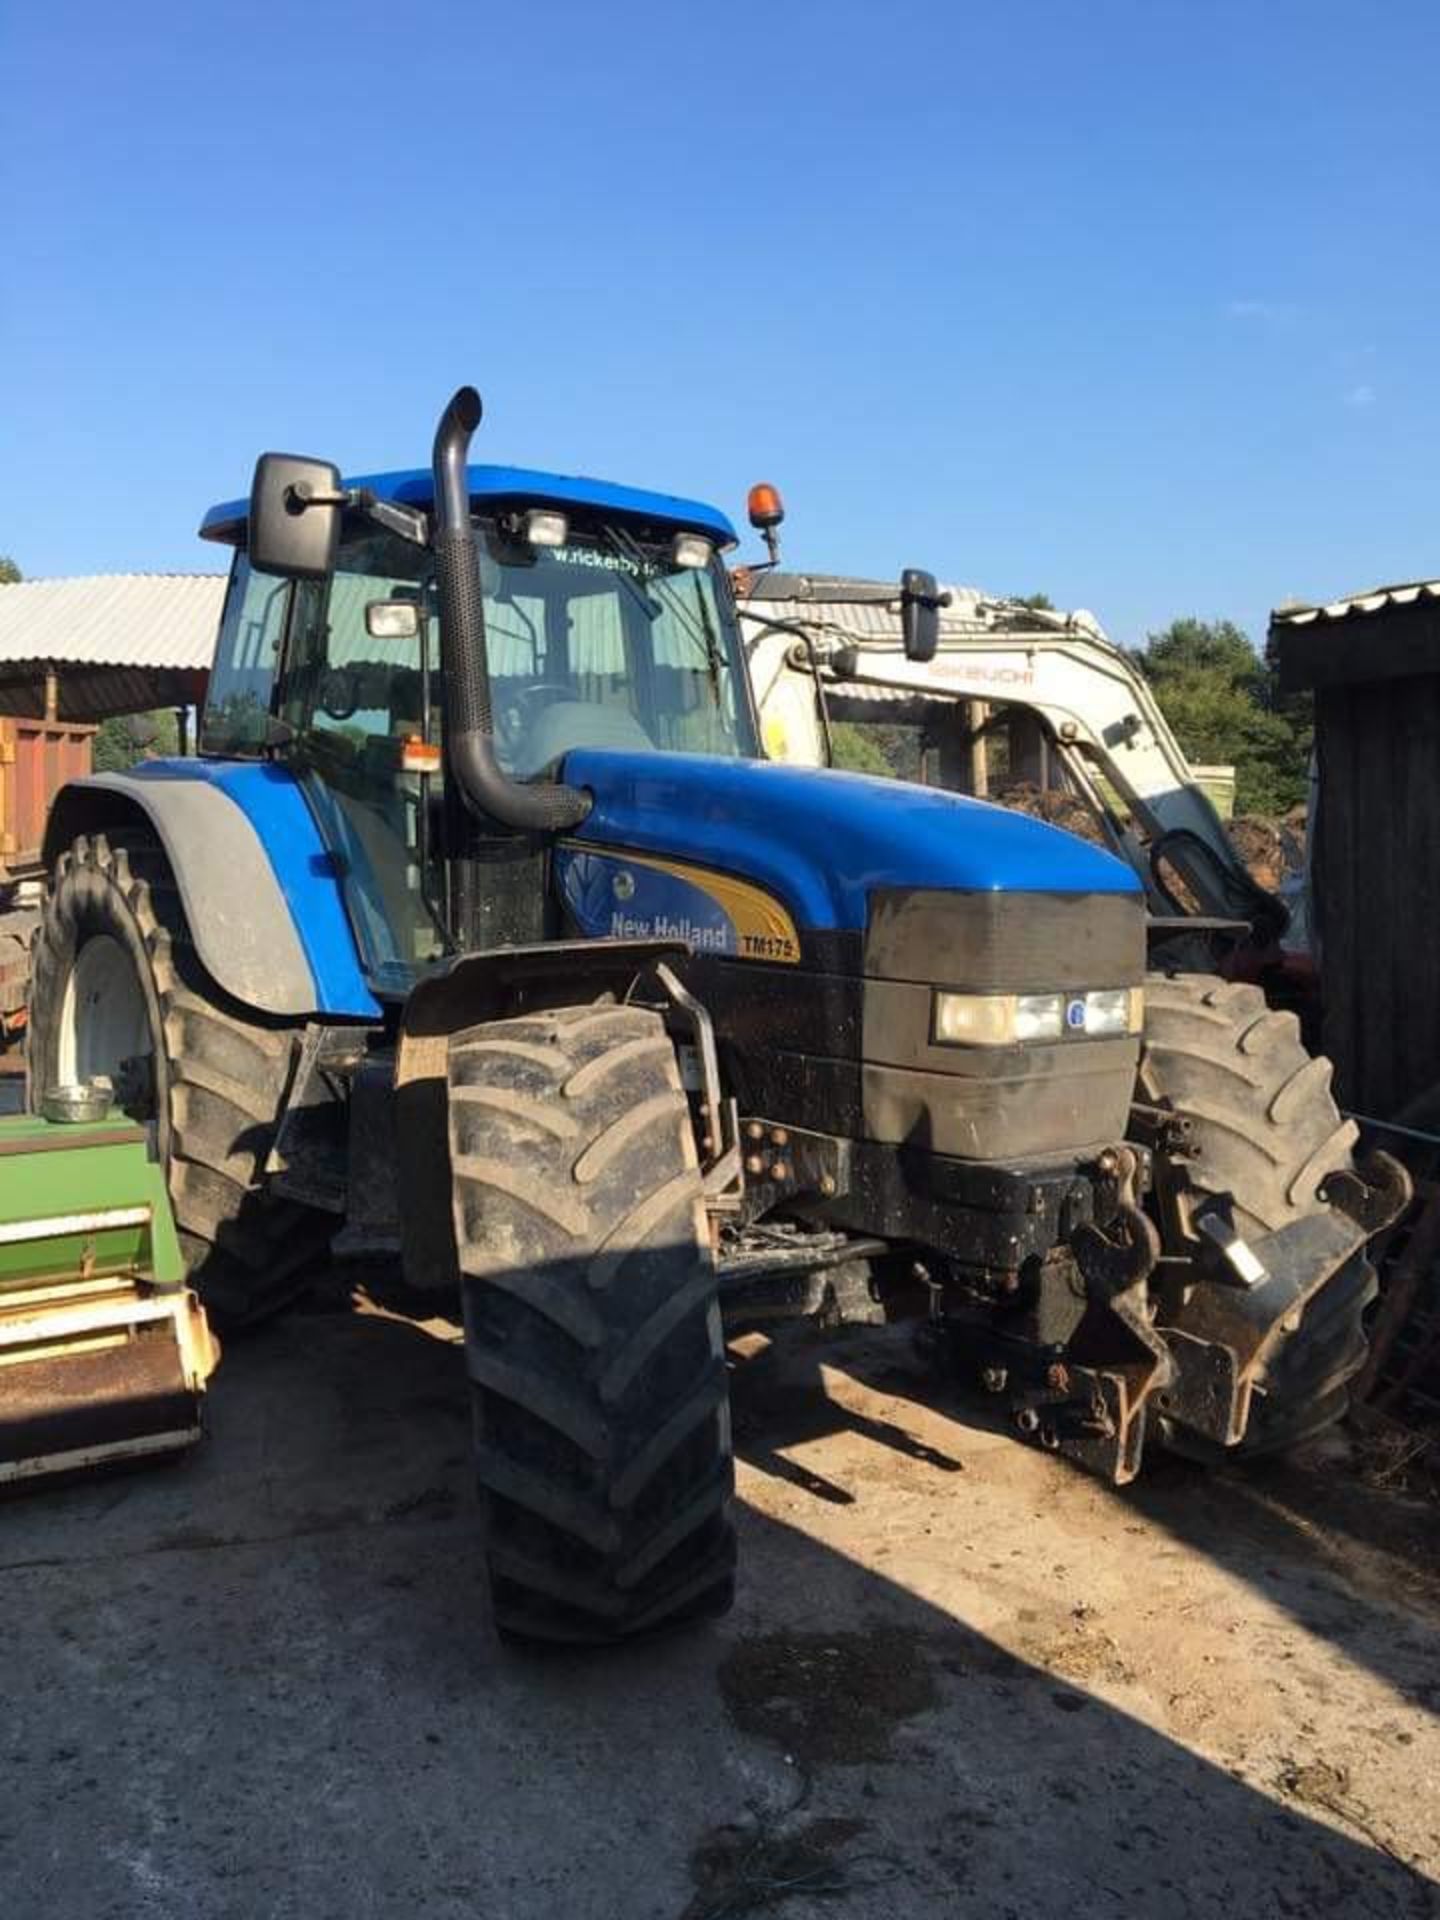 NEW HOLLAND TM175 TRACTOR ,2005 YEAR ,7020 HOURS , FRONT LINKAGE